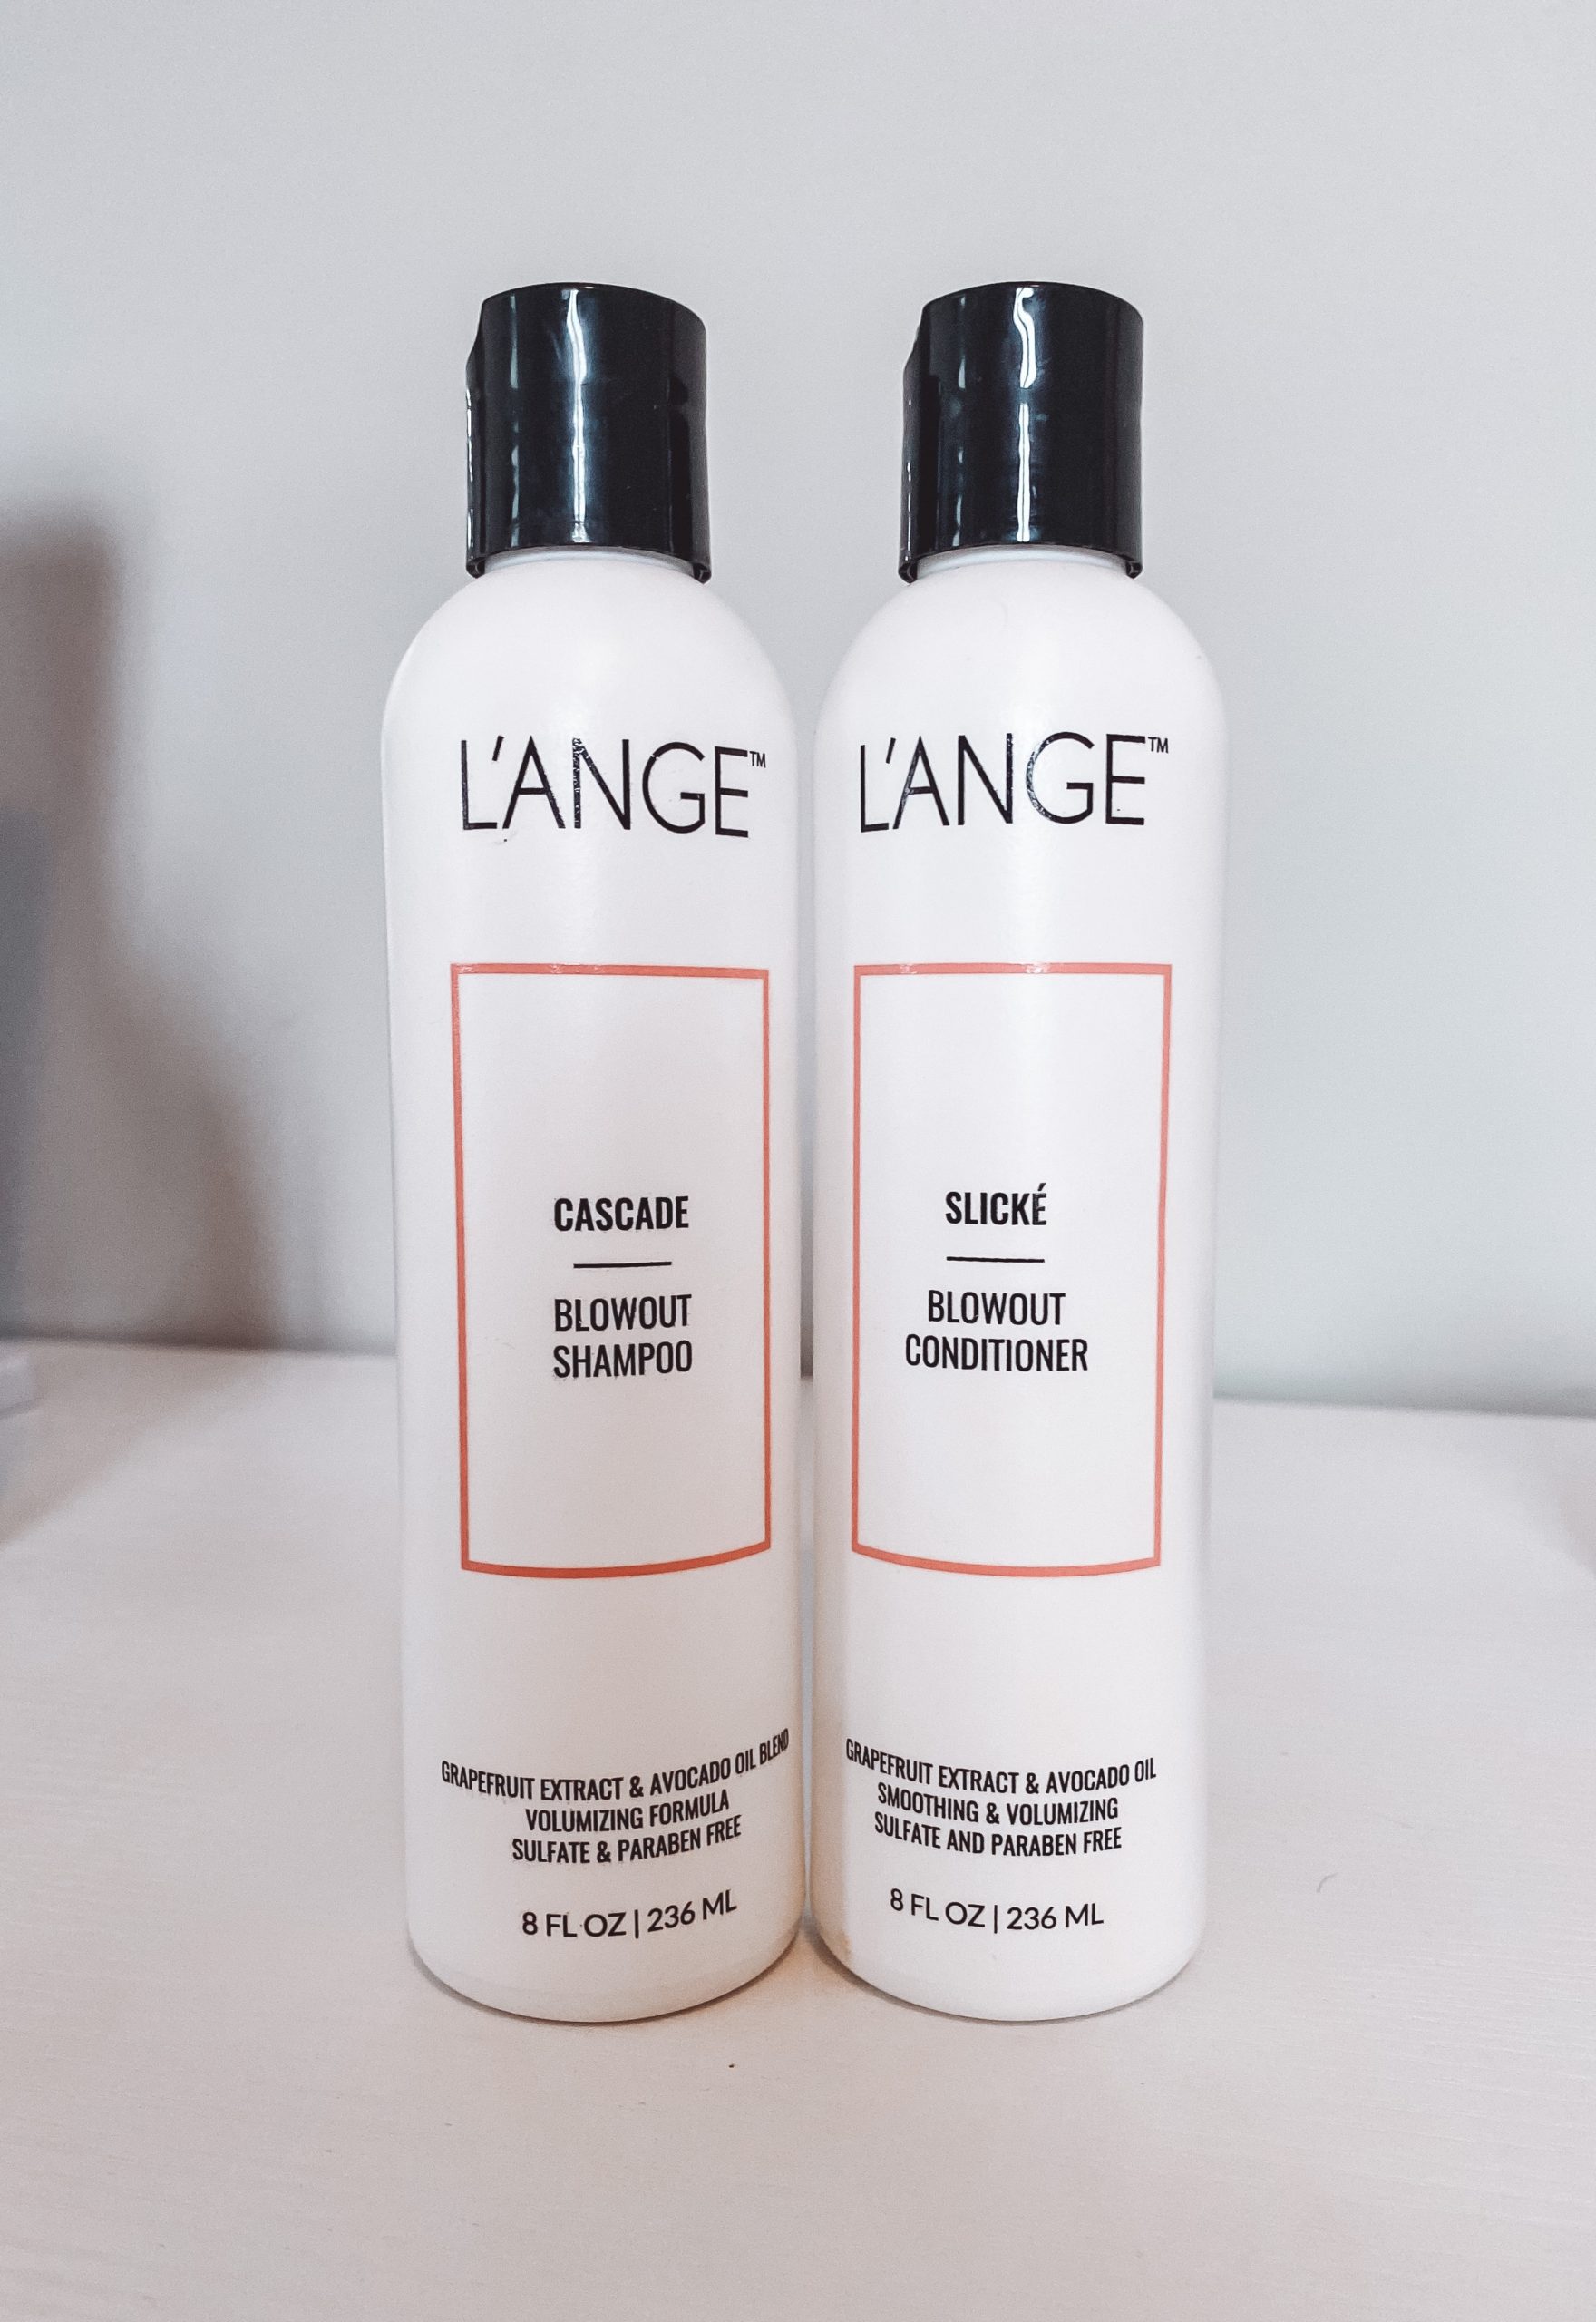 Blowout Shampoo and Conditioner